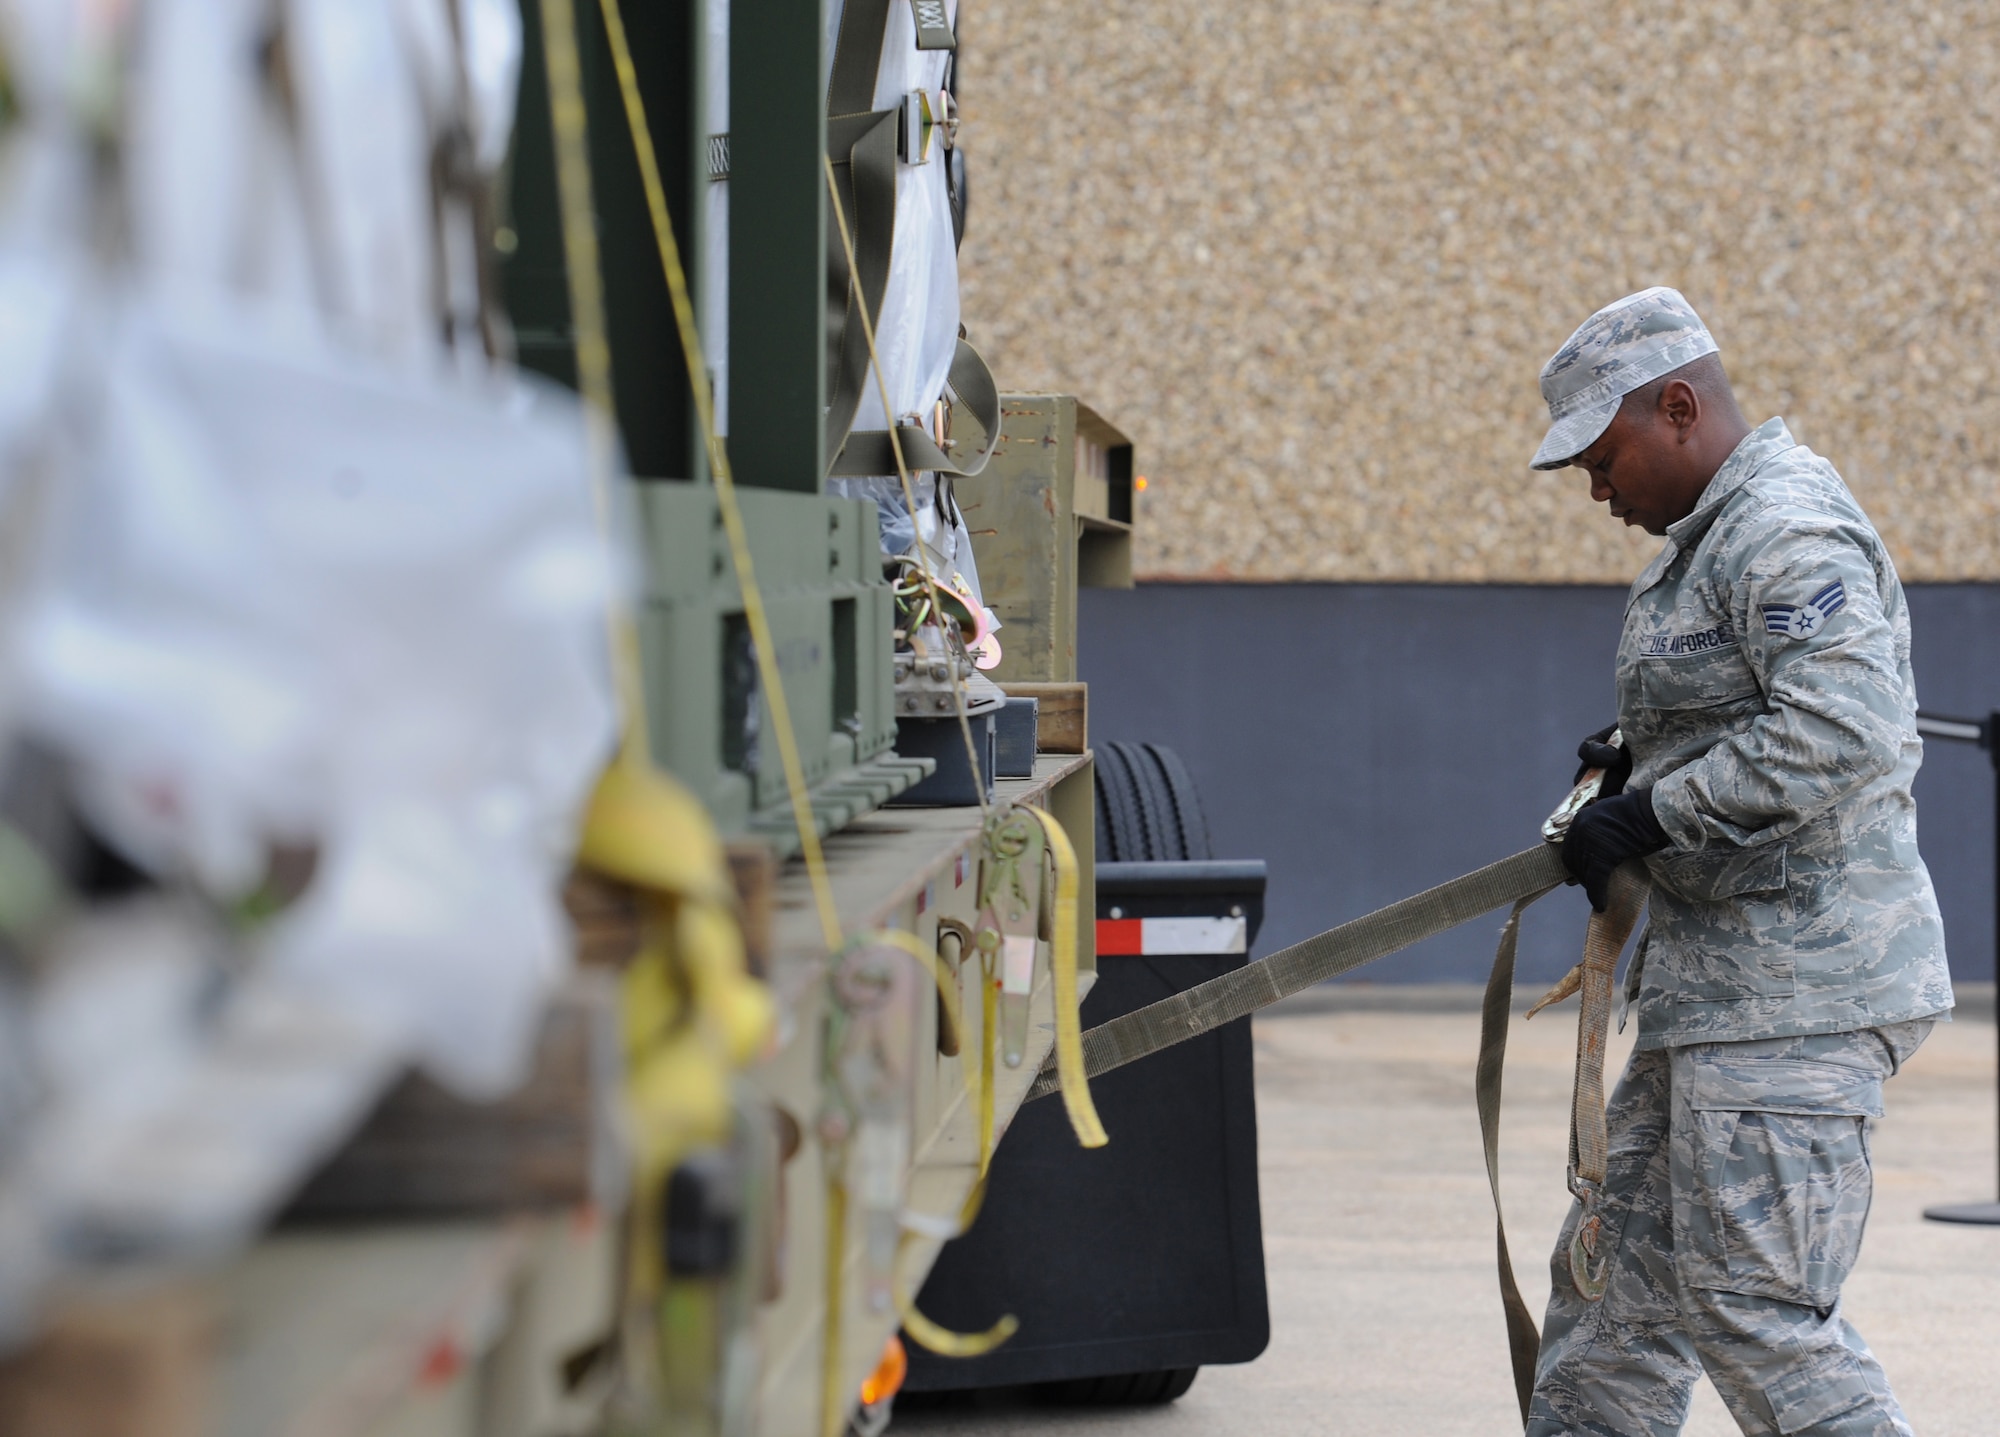 Senior Airman Mikhail Gordon, 81st Logistics Readiness Squadron vehicle operator, removes cargo straps at the supply warehouse loading docks during a deployment exercise Dec. 7, 2016, on Keesler Air Force Base, Miss. The exercise scenario tested the mission readiness of Team Keesler for simultaneous world-wide deployments. (U.S. Air Force photo by Kemberly Groue)